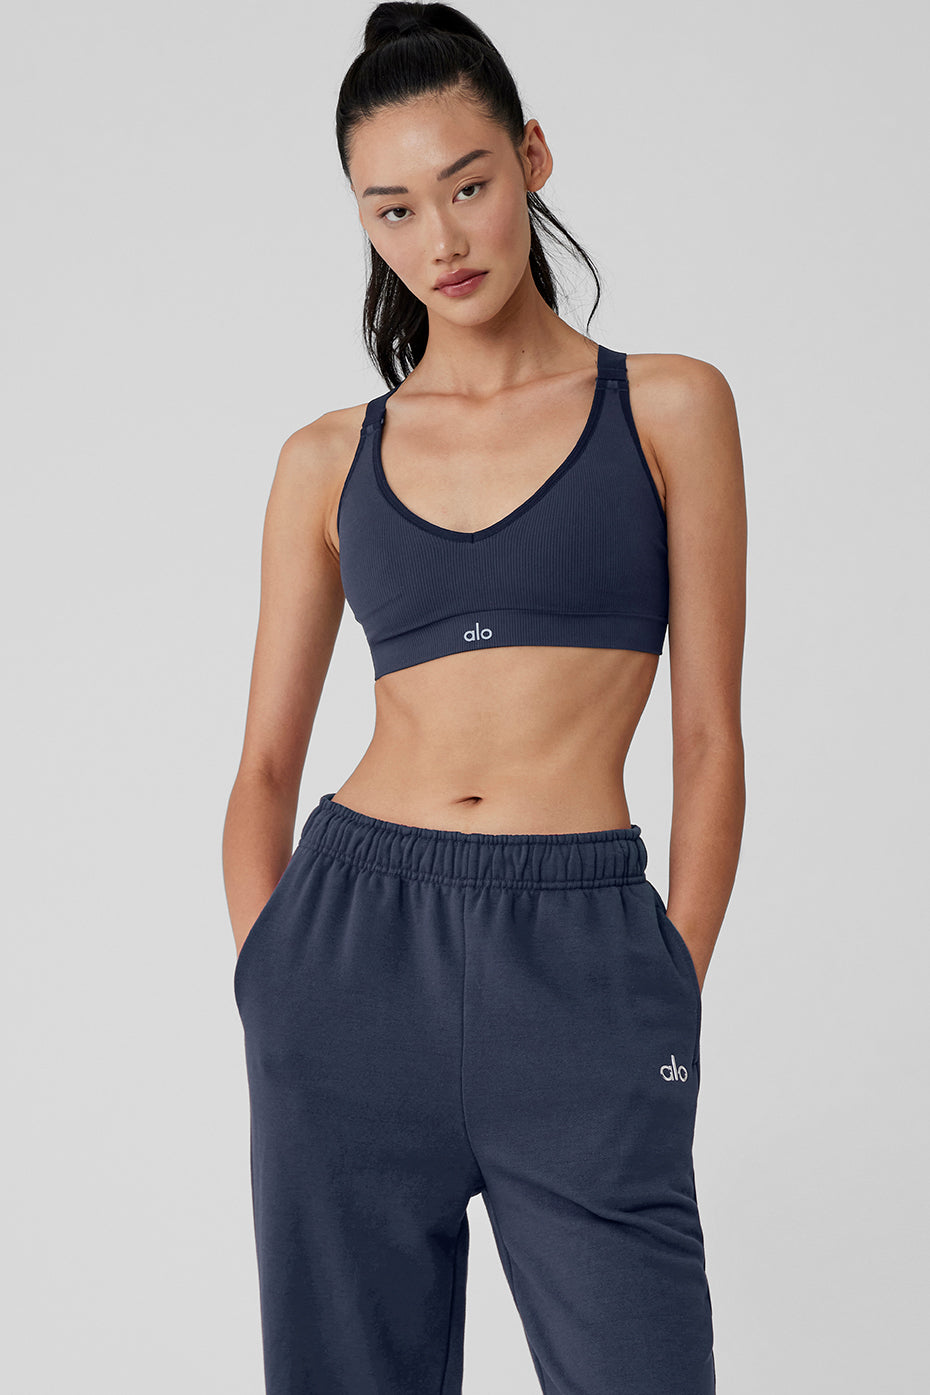 Womens Alo Yoga blue Airlift Intrigue Sports Bra, Harrods # {CountryCode}